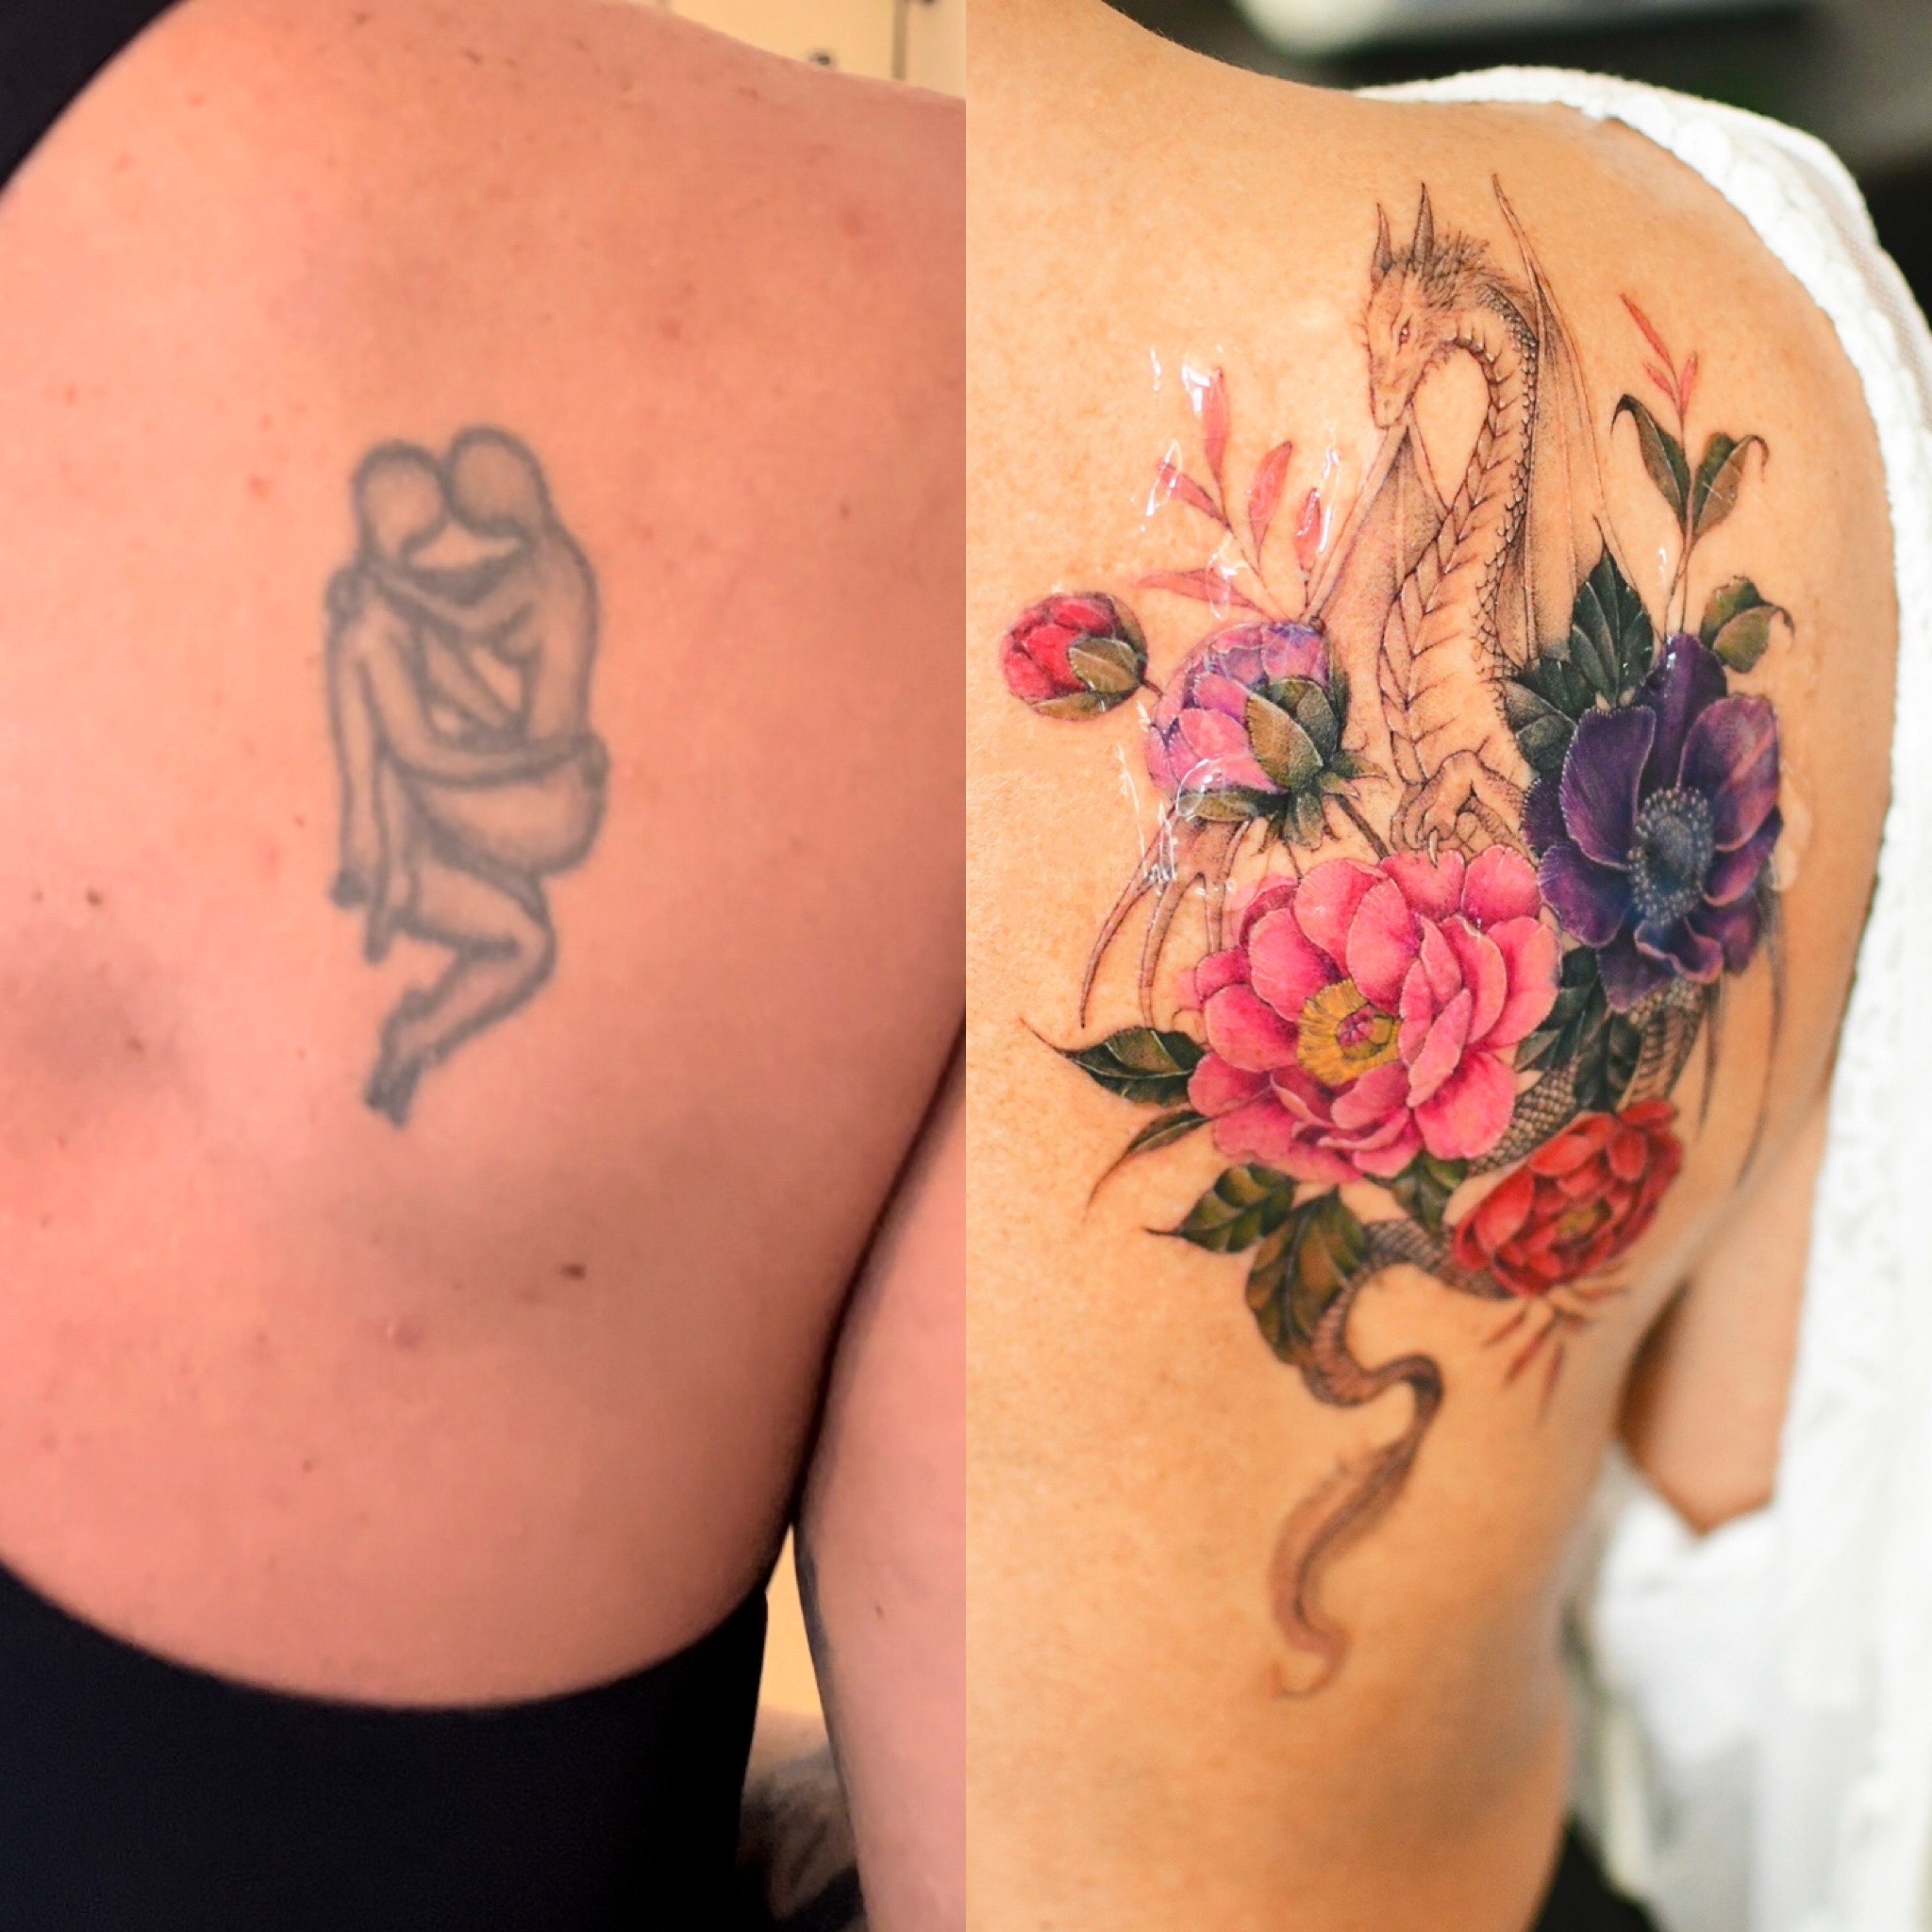 Scar Cover-Up Tattoos Help Women Regain Confidence in Their Bodies